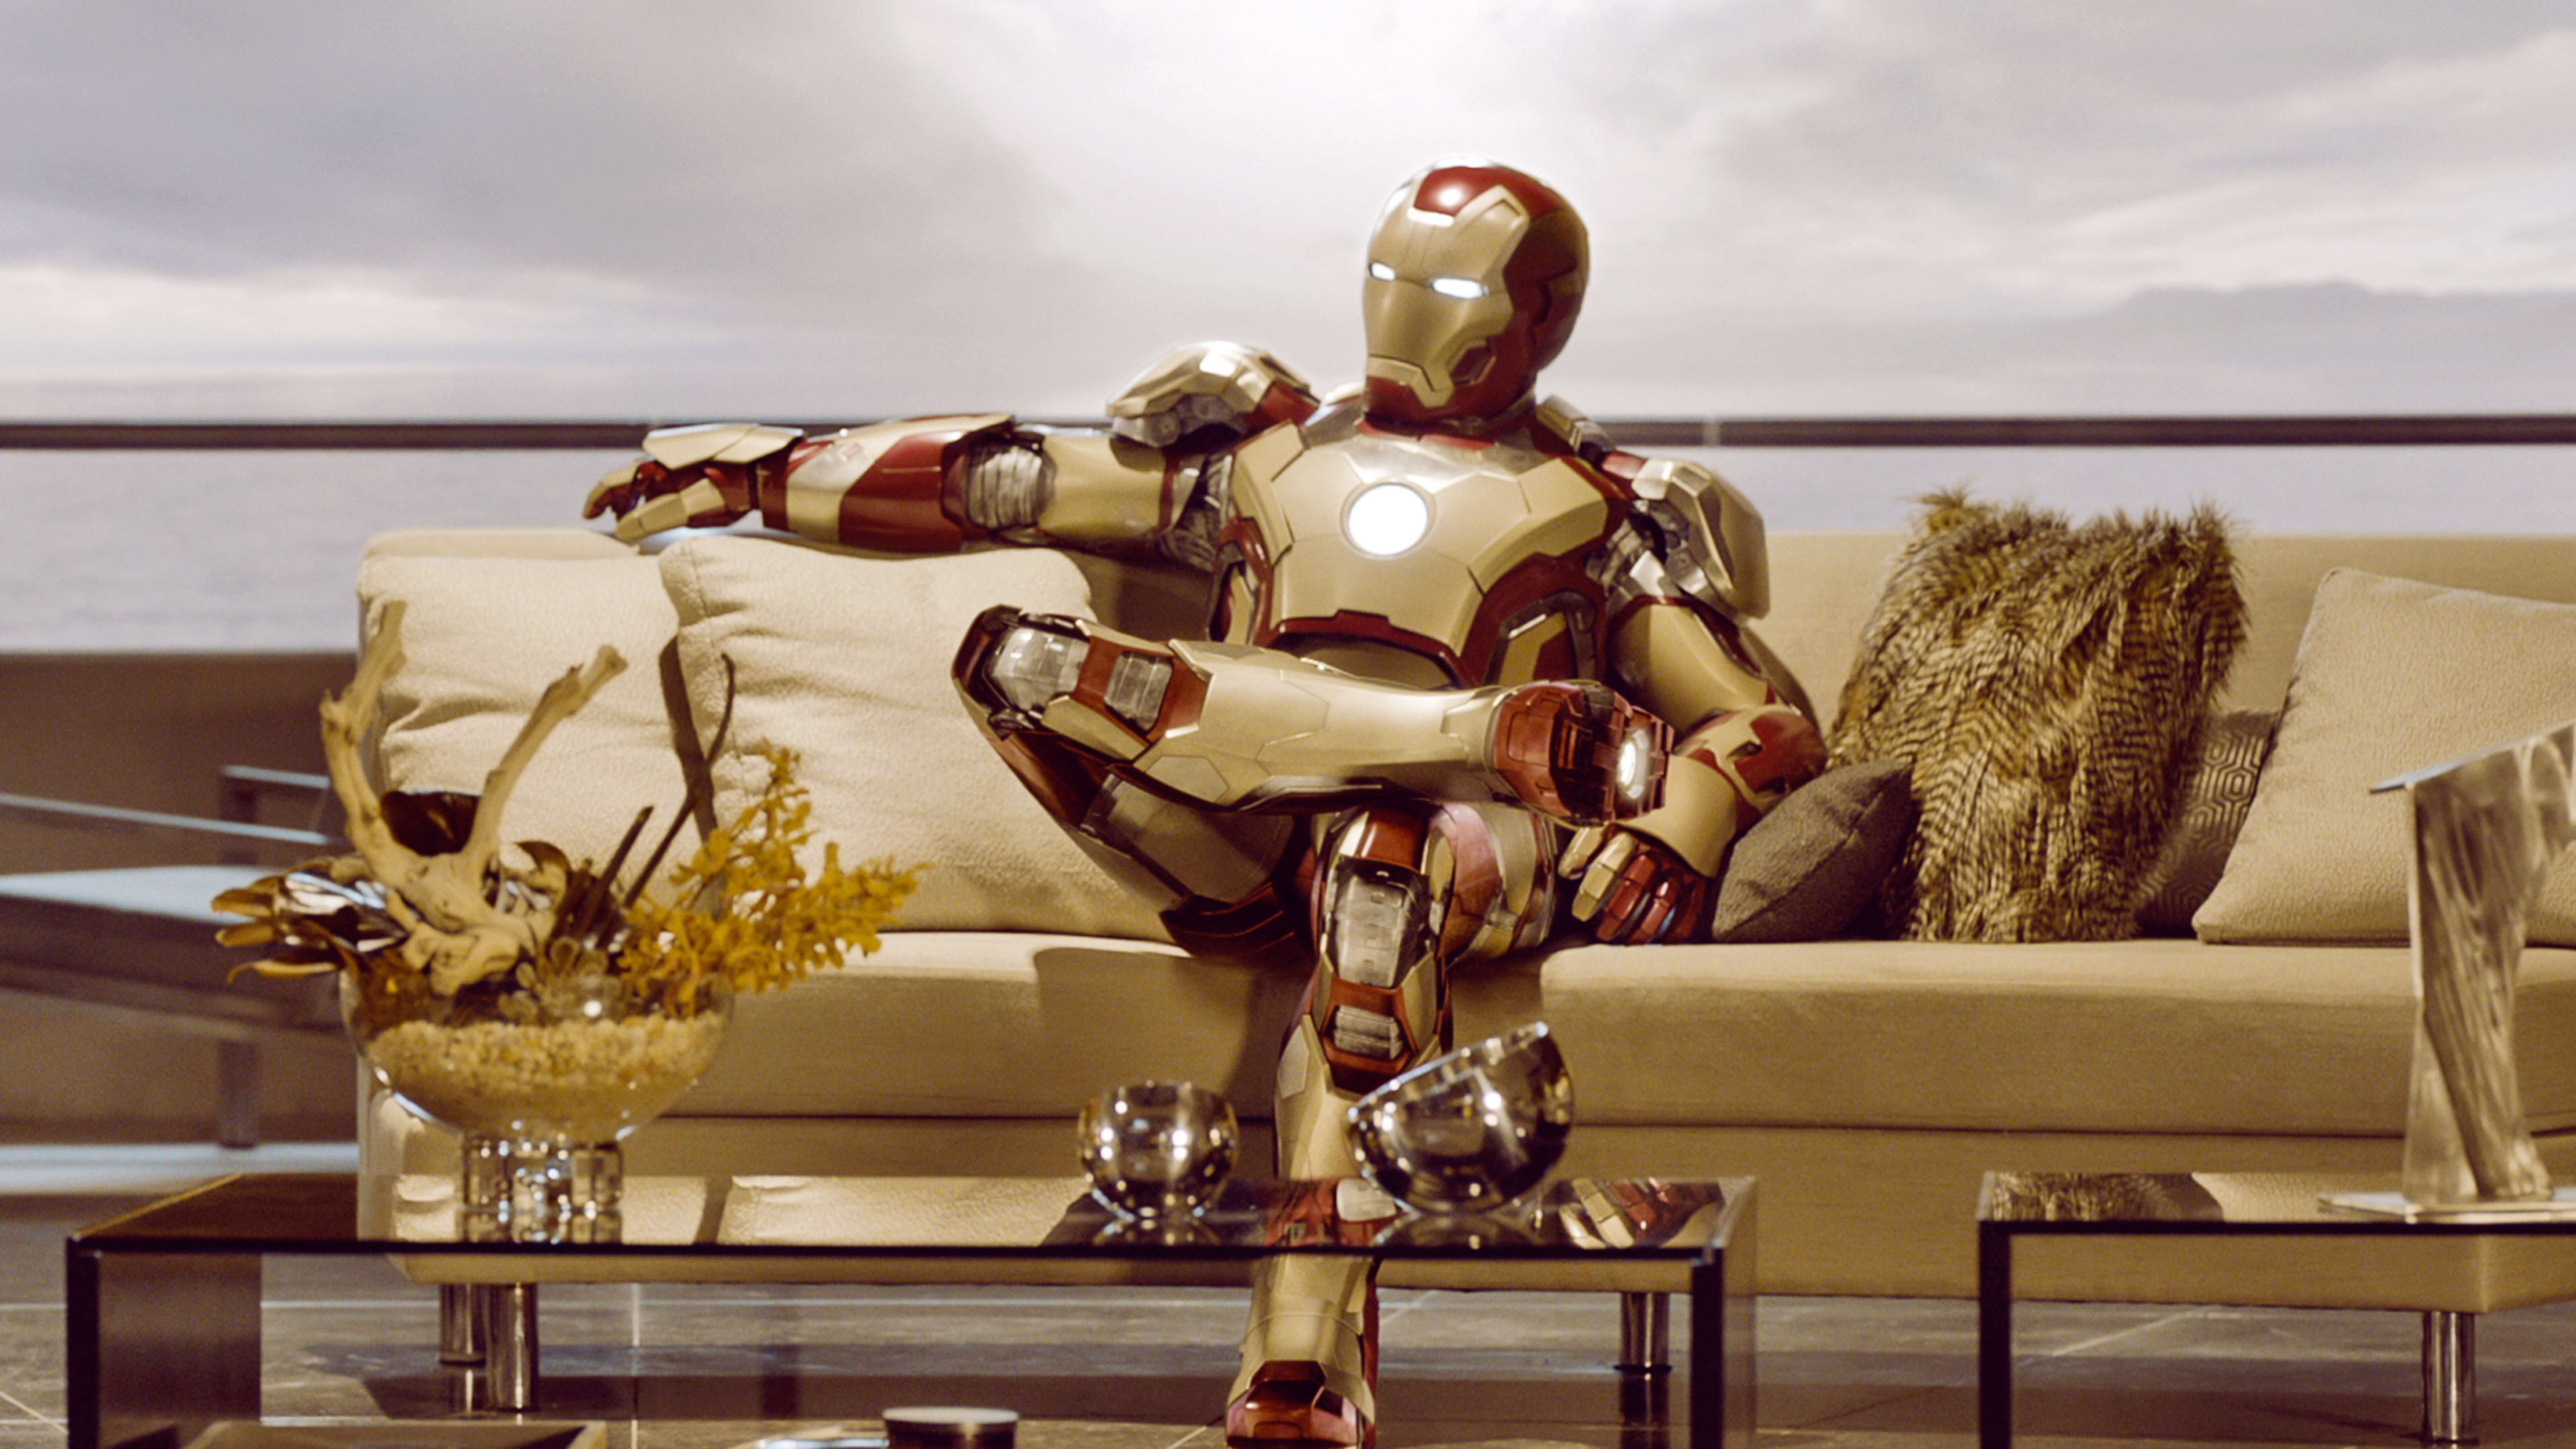 Mark Zuckerberg Wants To Build His Own AI Butler, Inspired By Iron Man